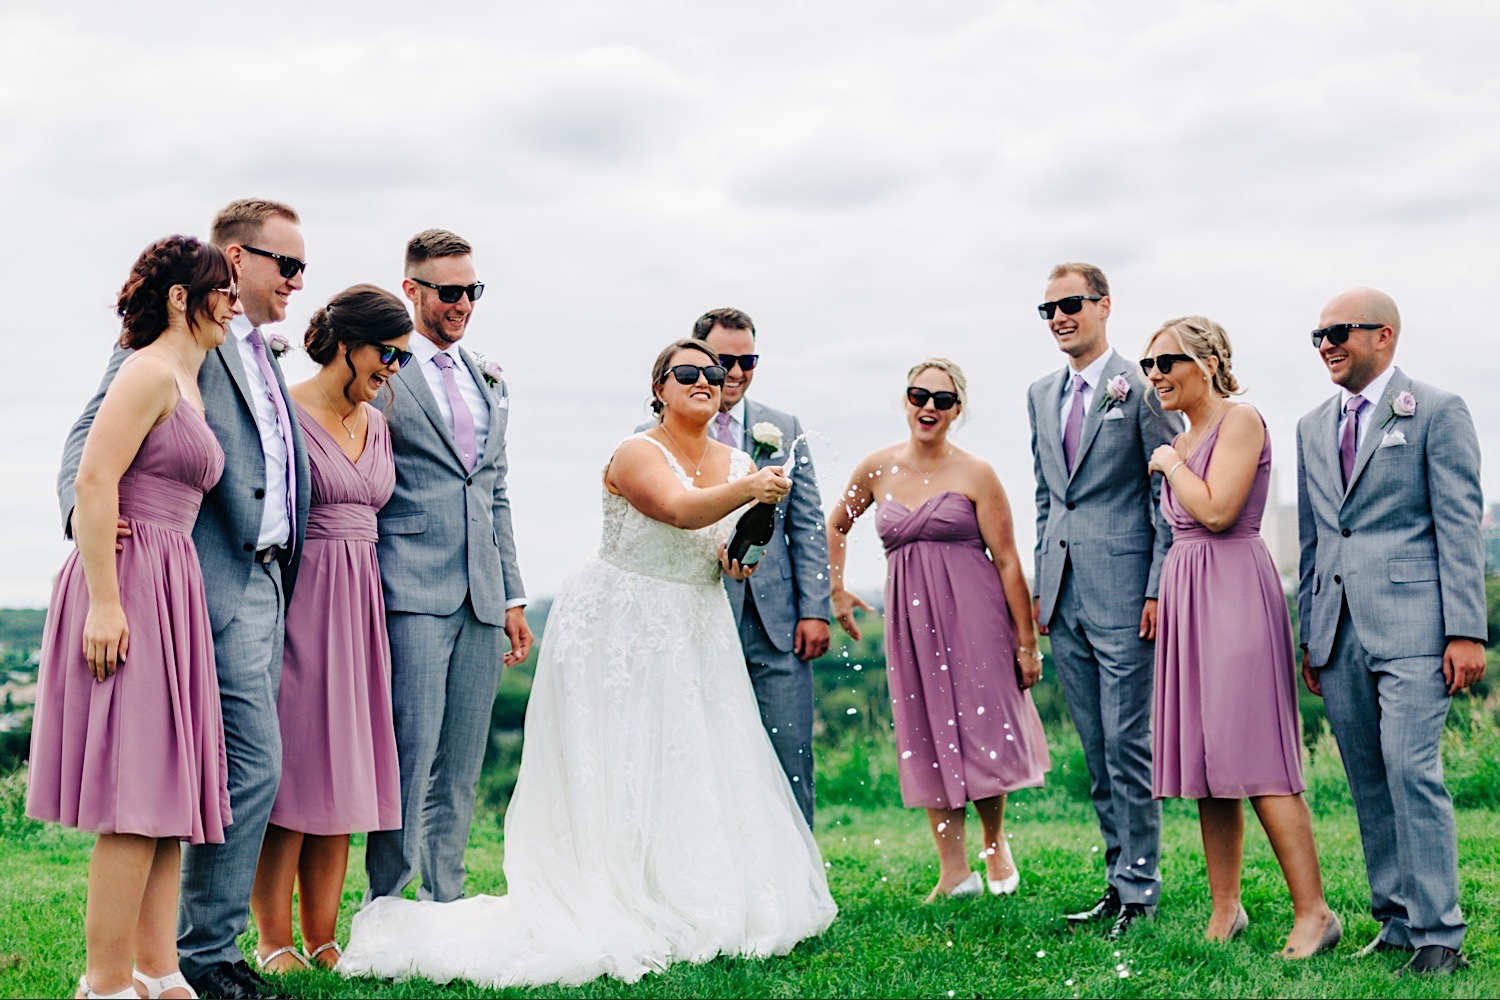 Bride popping a champagne bottle with bridesmaids in purple dresses and groomsmen in grey suits. Everyone is wearing sunglasses. Downtown skyline and overcast day.